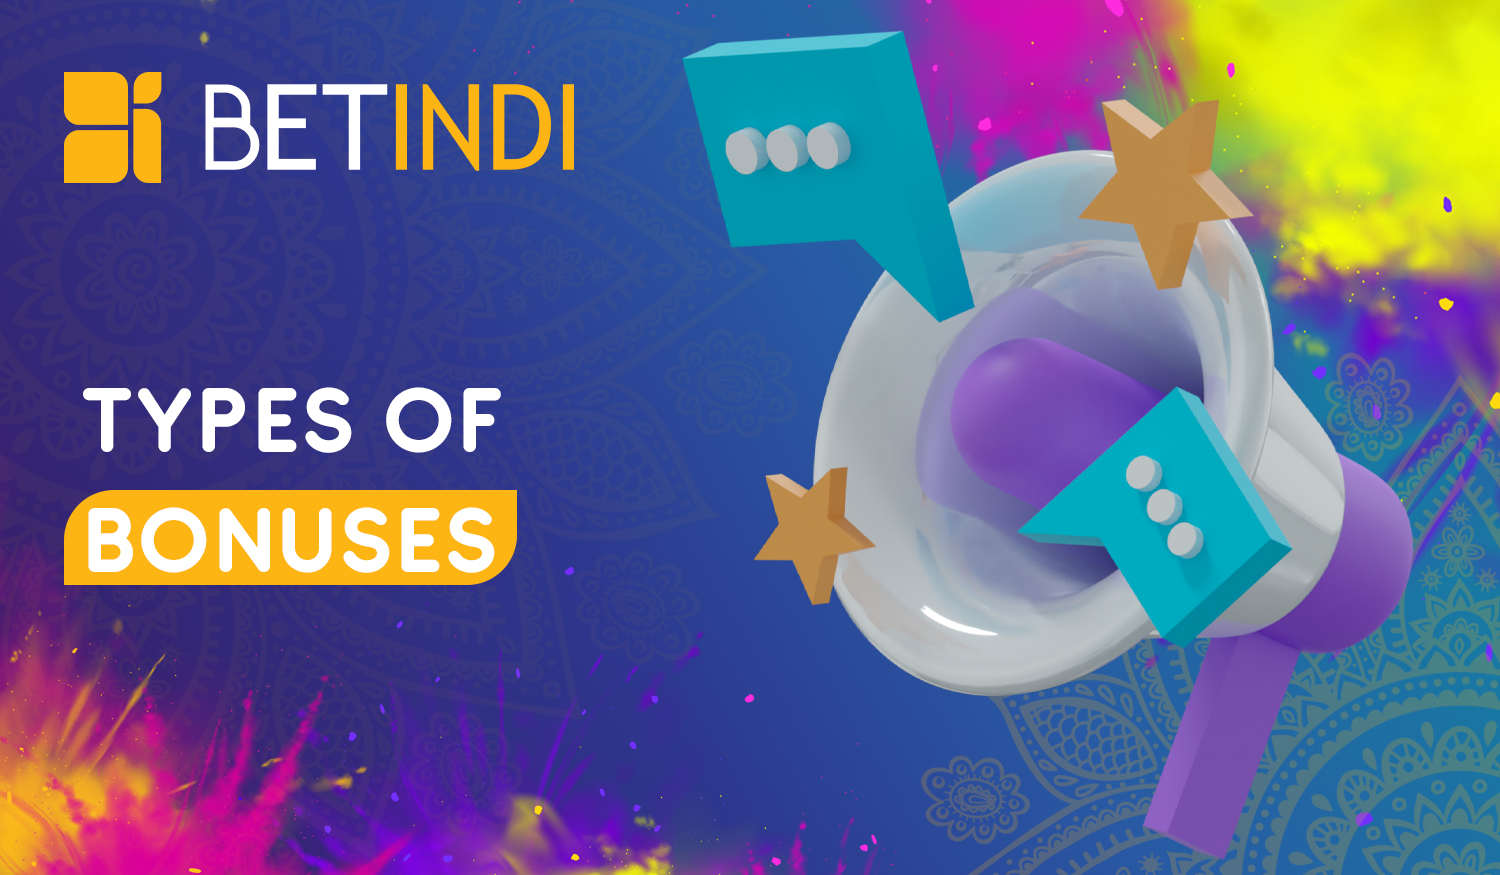 What types of bonuses are available on Betindi for Indian users